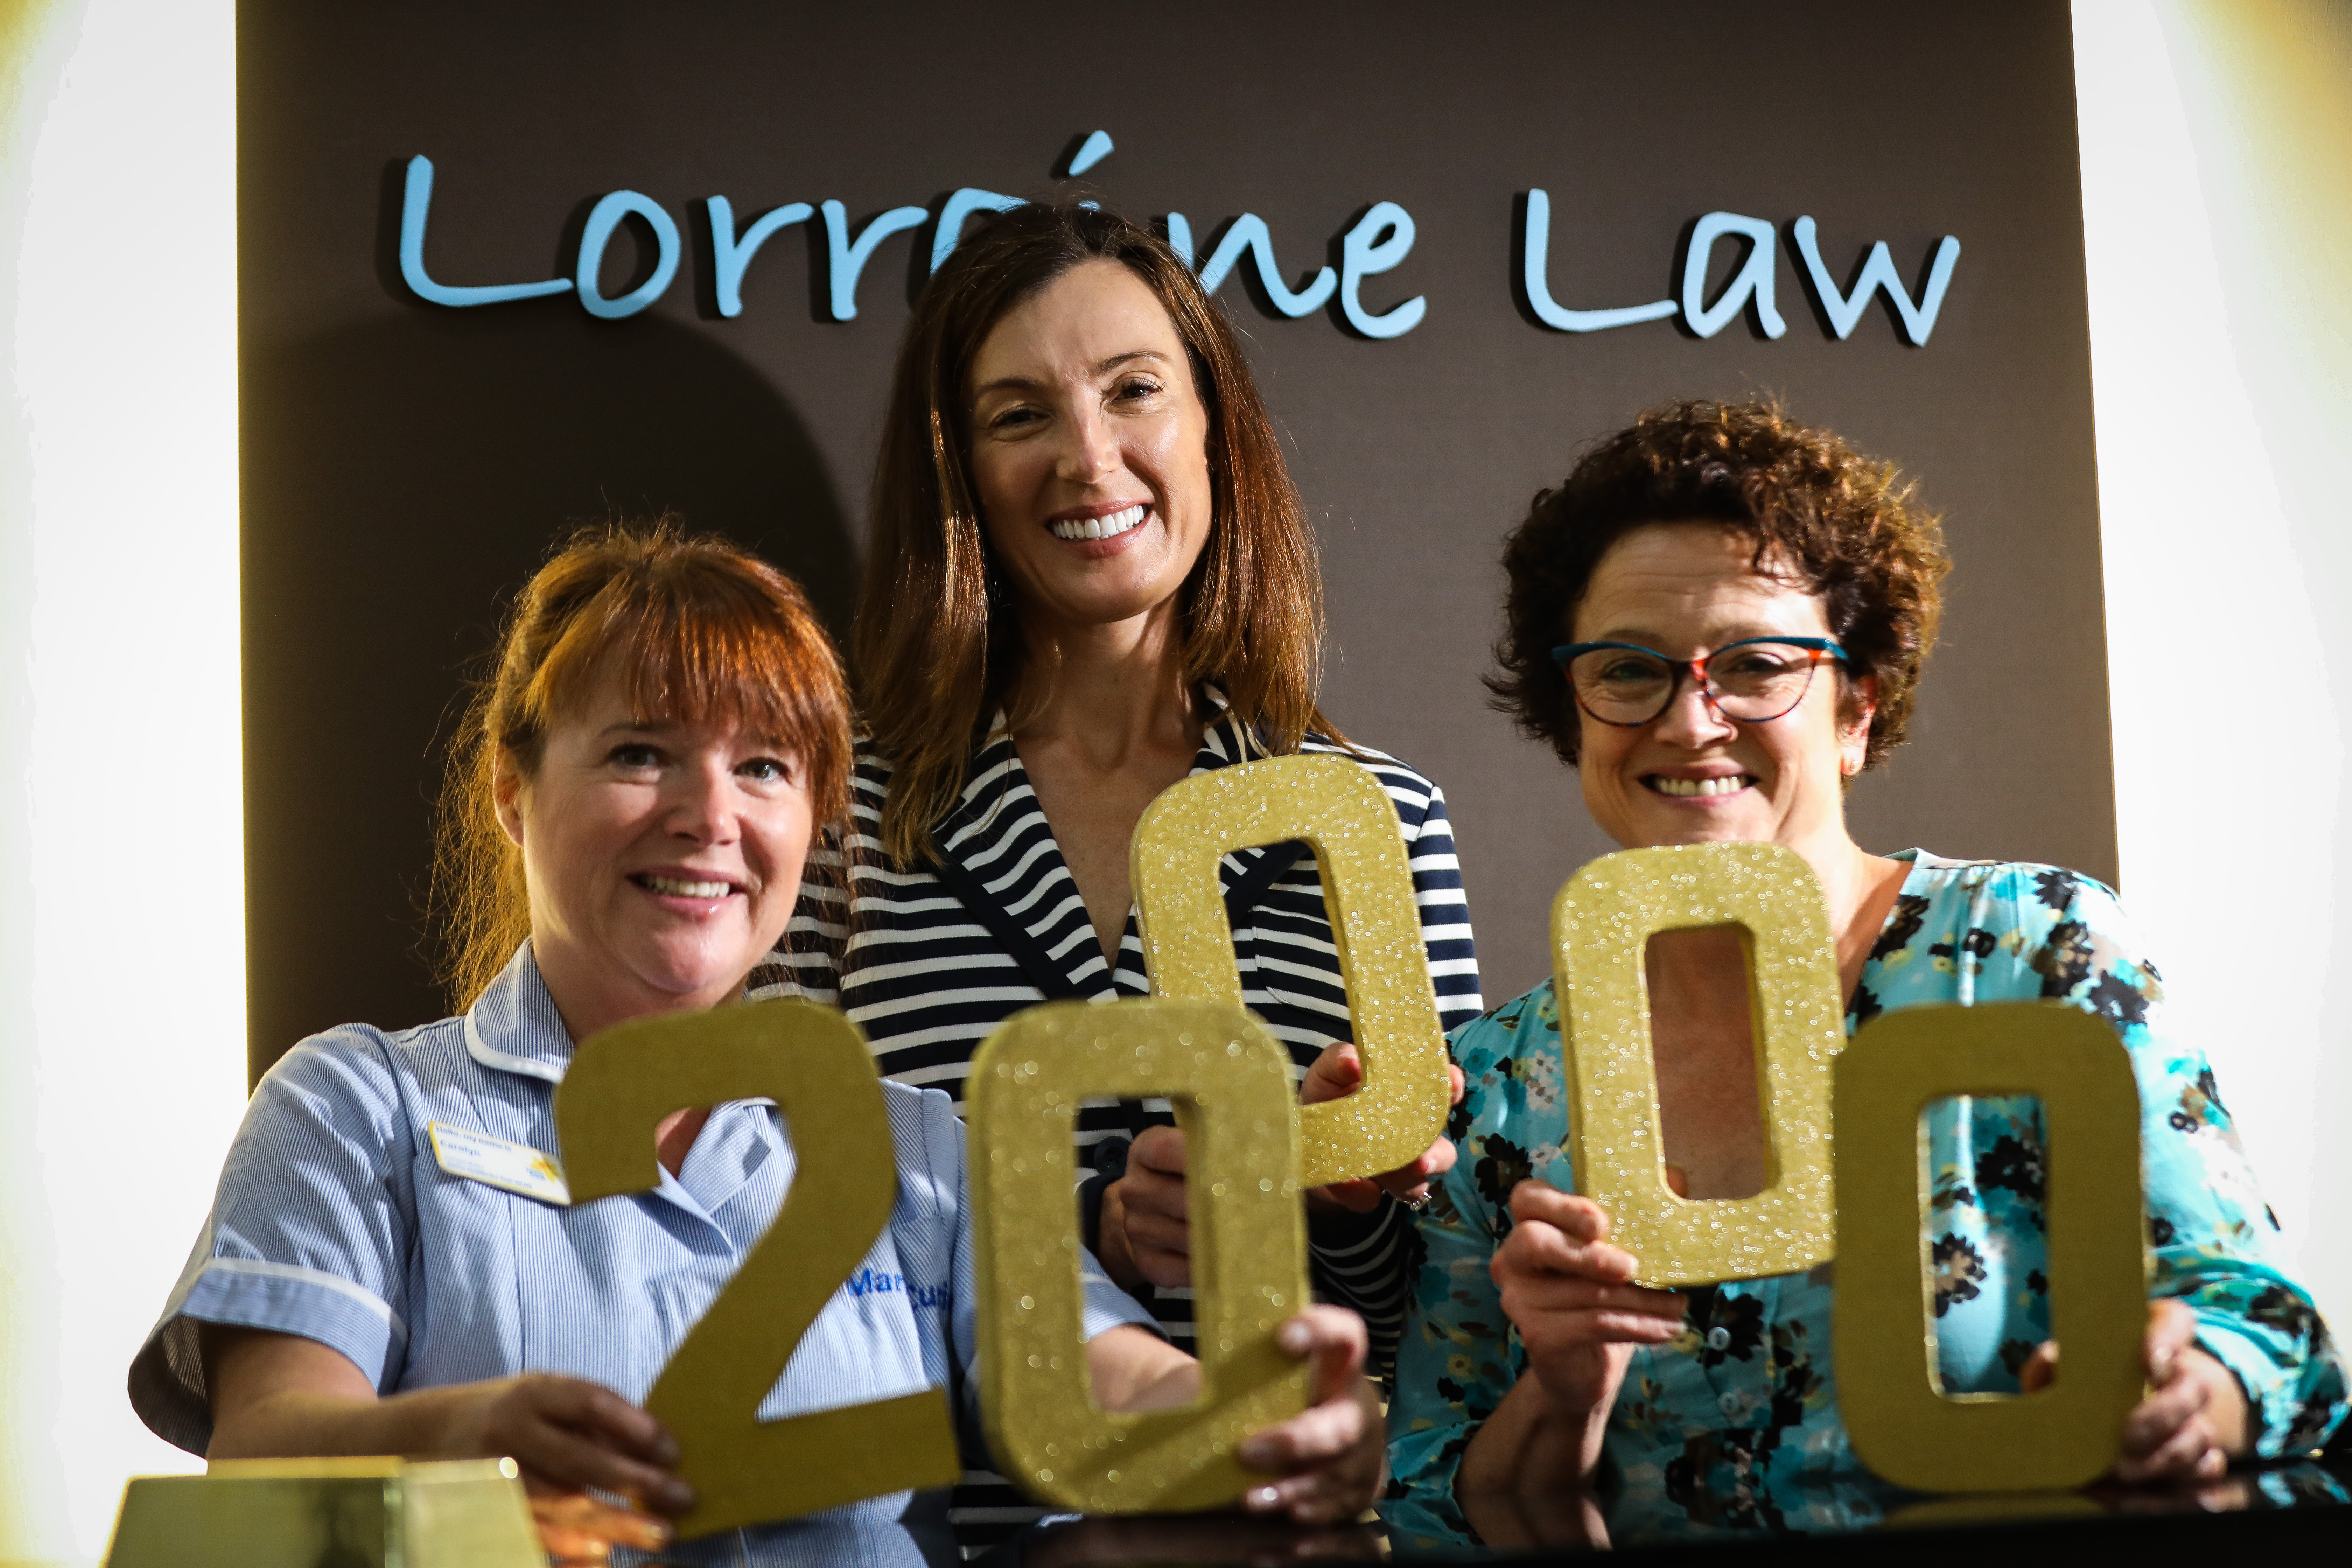 Carolyn Watts - Marie Curie Healthcare Assistant, Petra McMillan - Marie Curie and Lorraine Law